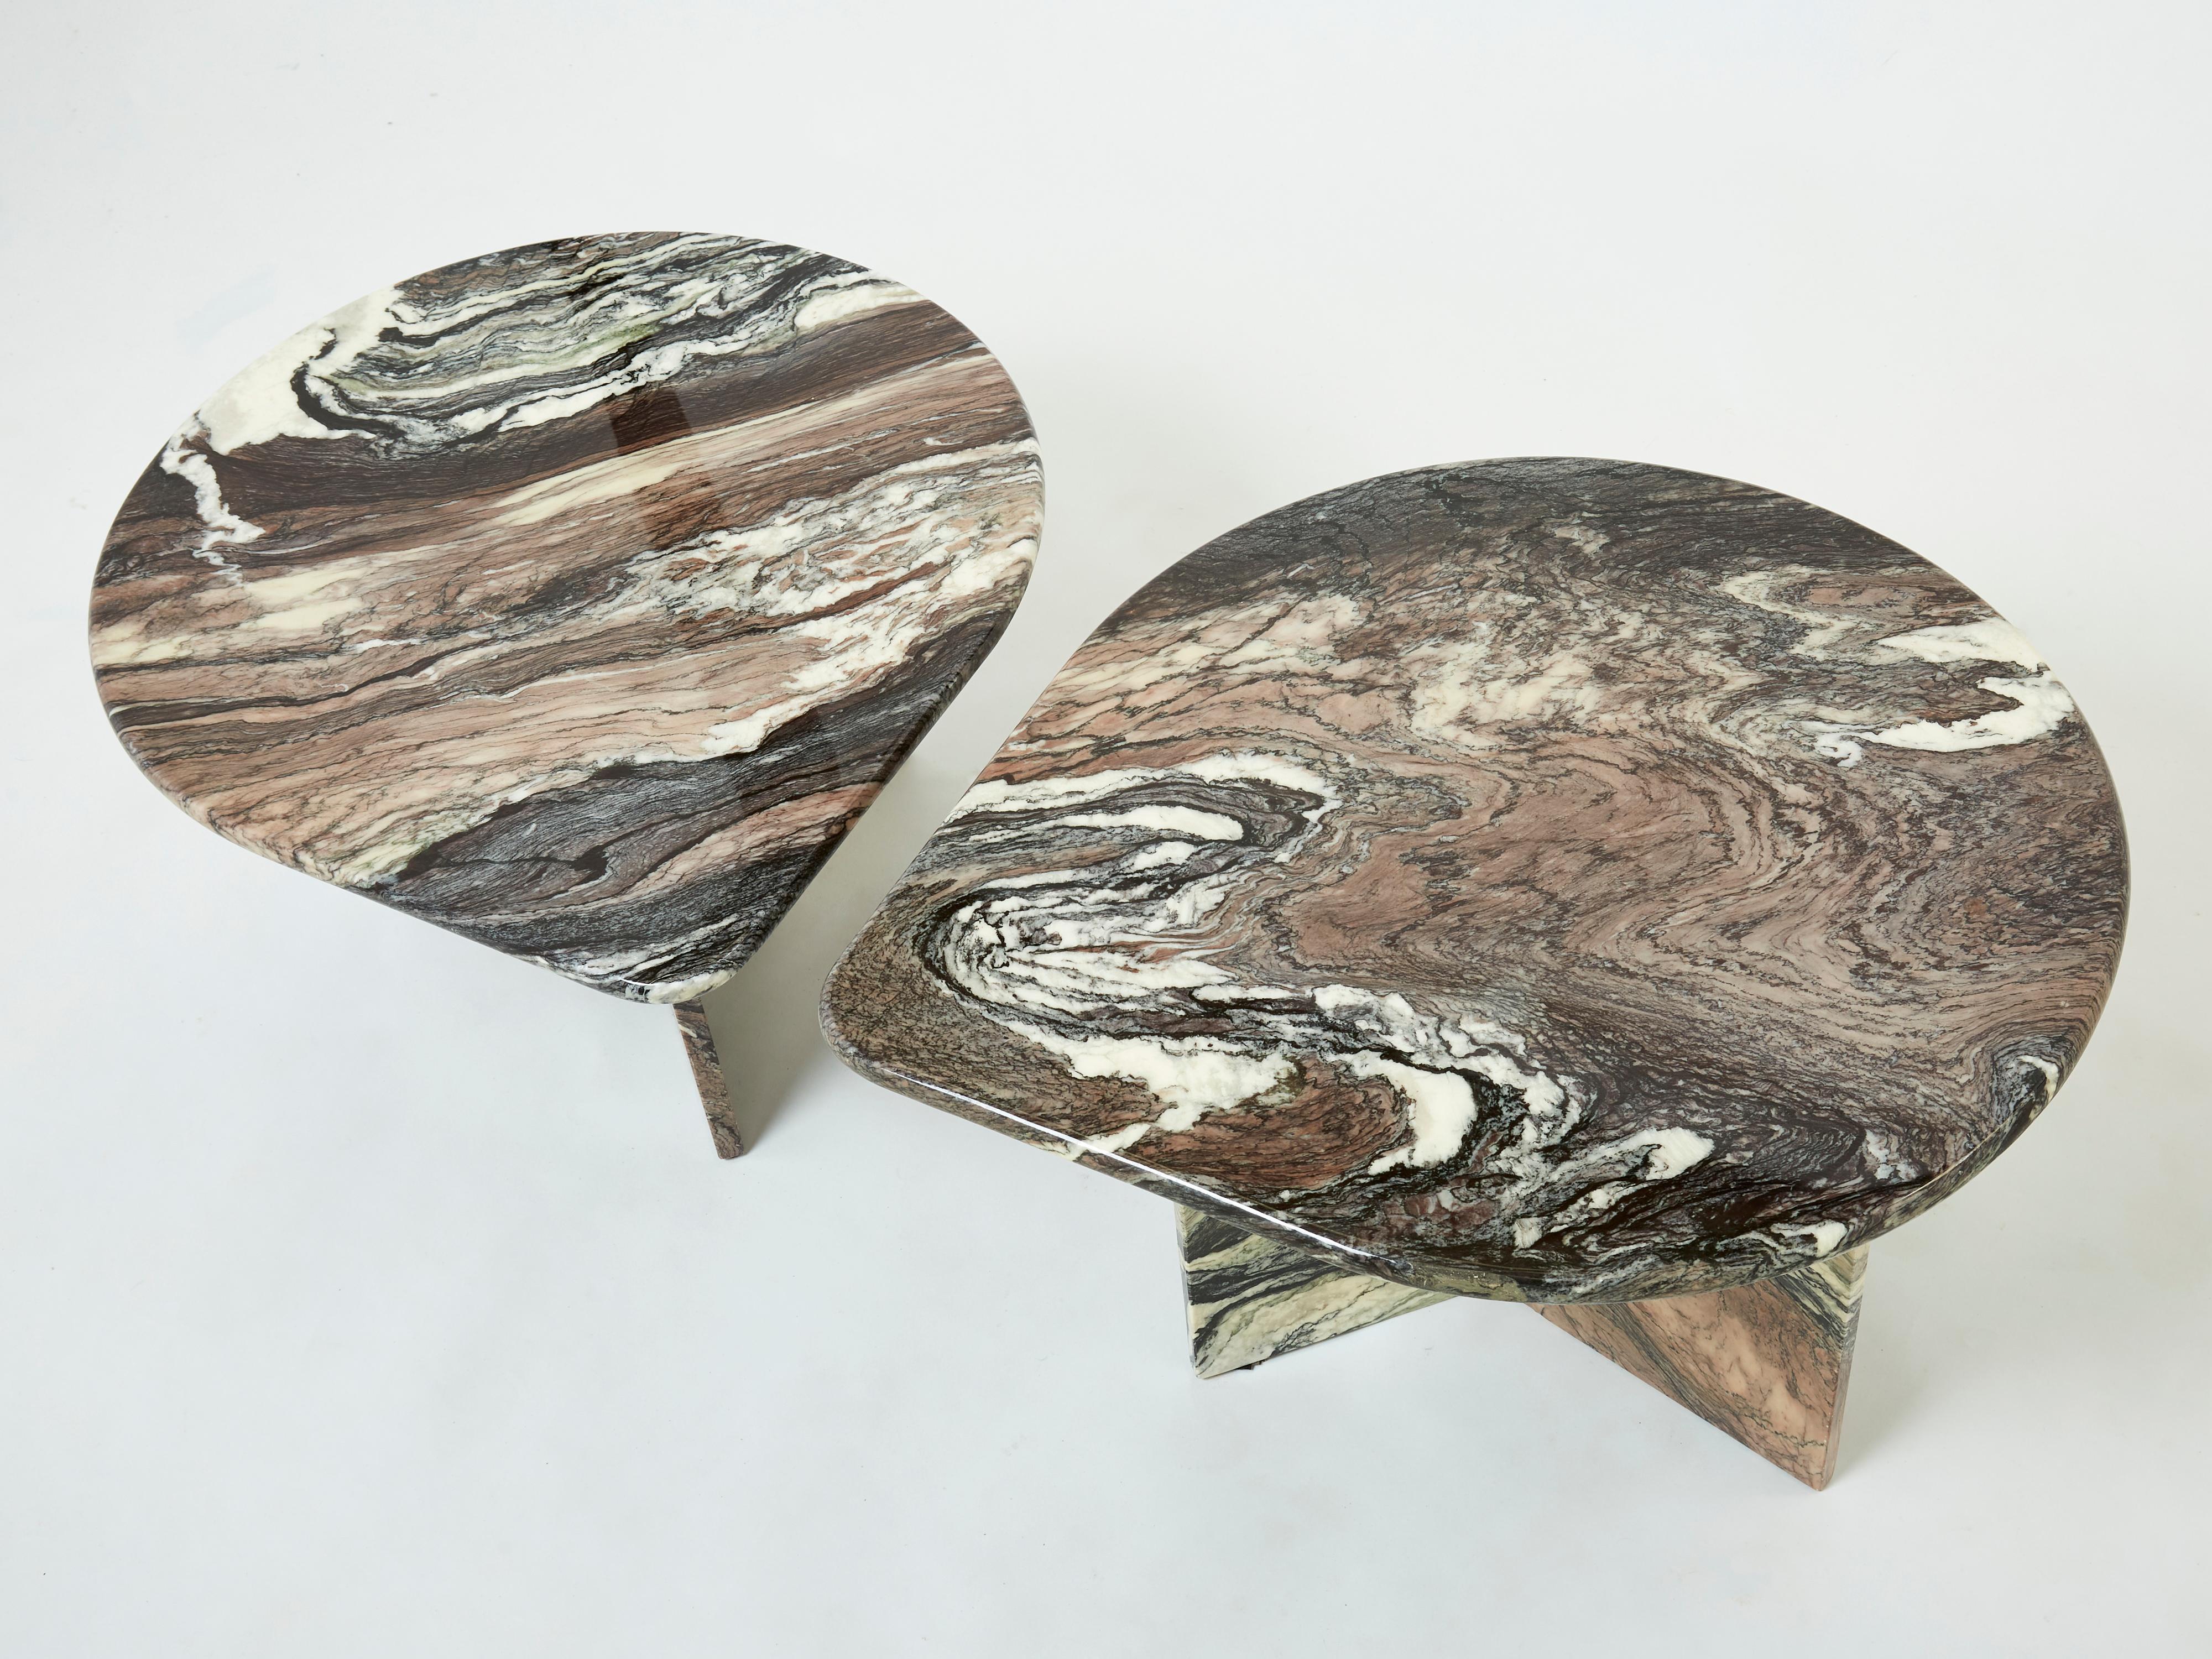 Unique set of two nesting tables made in France in the early 1970s from a beautiful sicilian brown black and white wavy marble. The thick surface of each table is slick yet intriguing, with a beautiful and original shape. The result is a